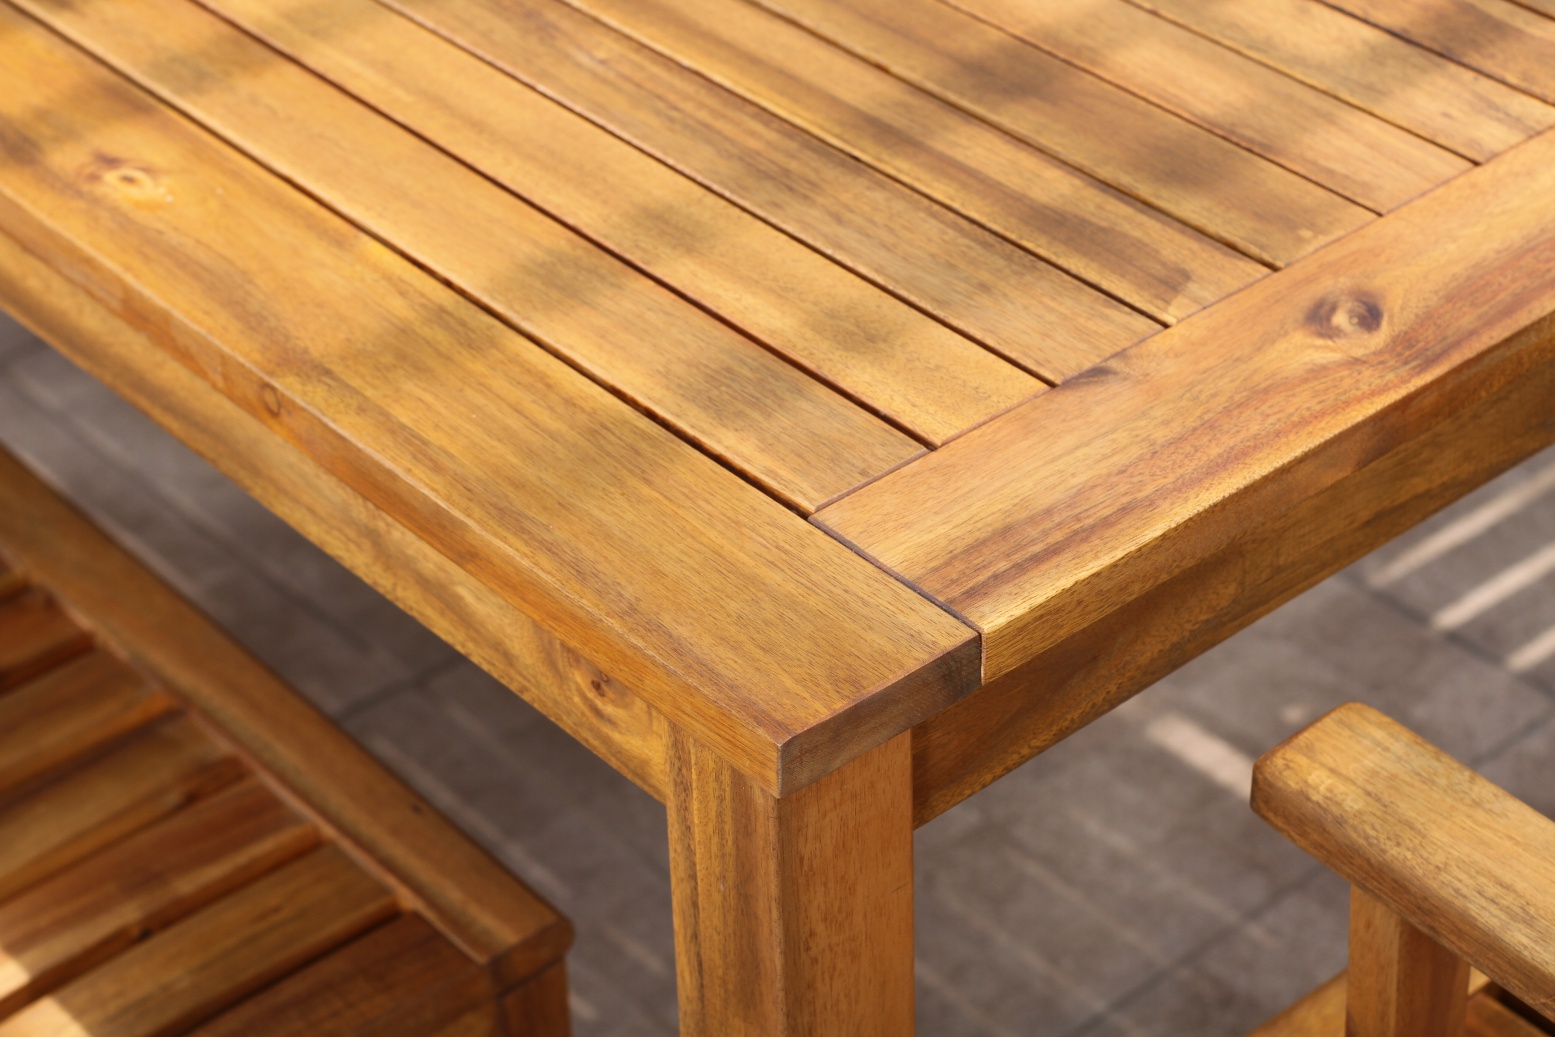 resize_JERICHO COLLECTION  SQUARE TABLE SLAT DETAILS (1).JPG